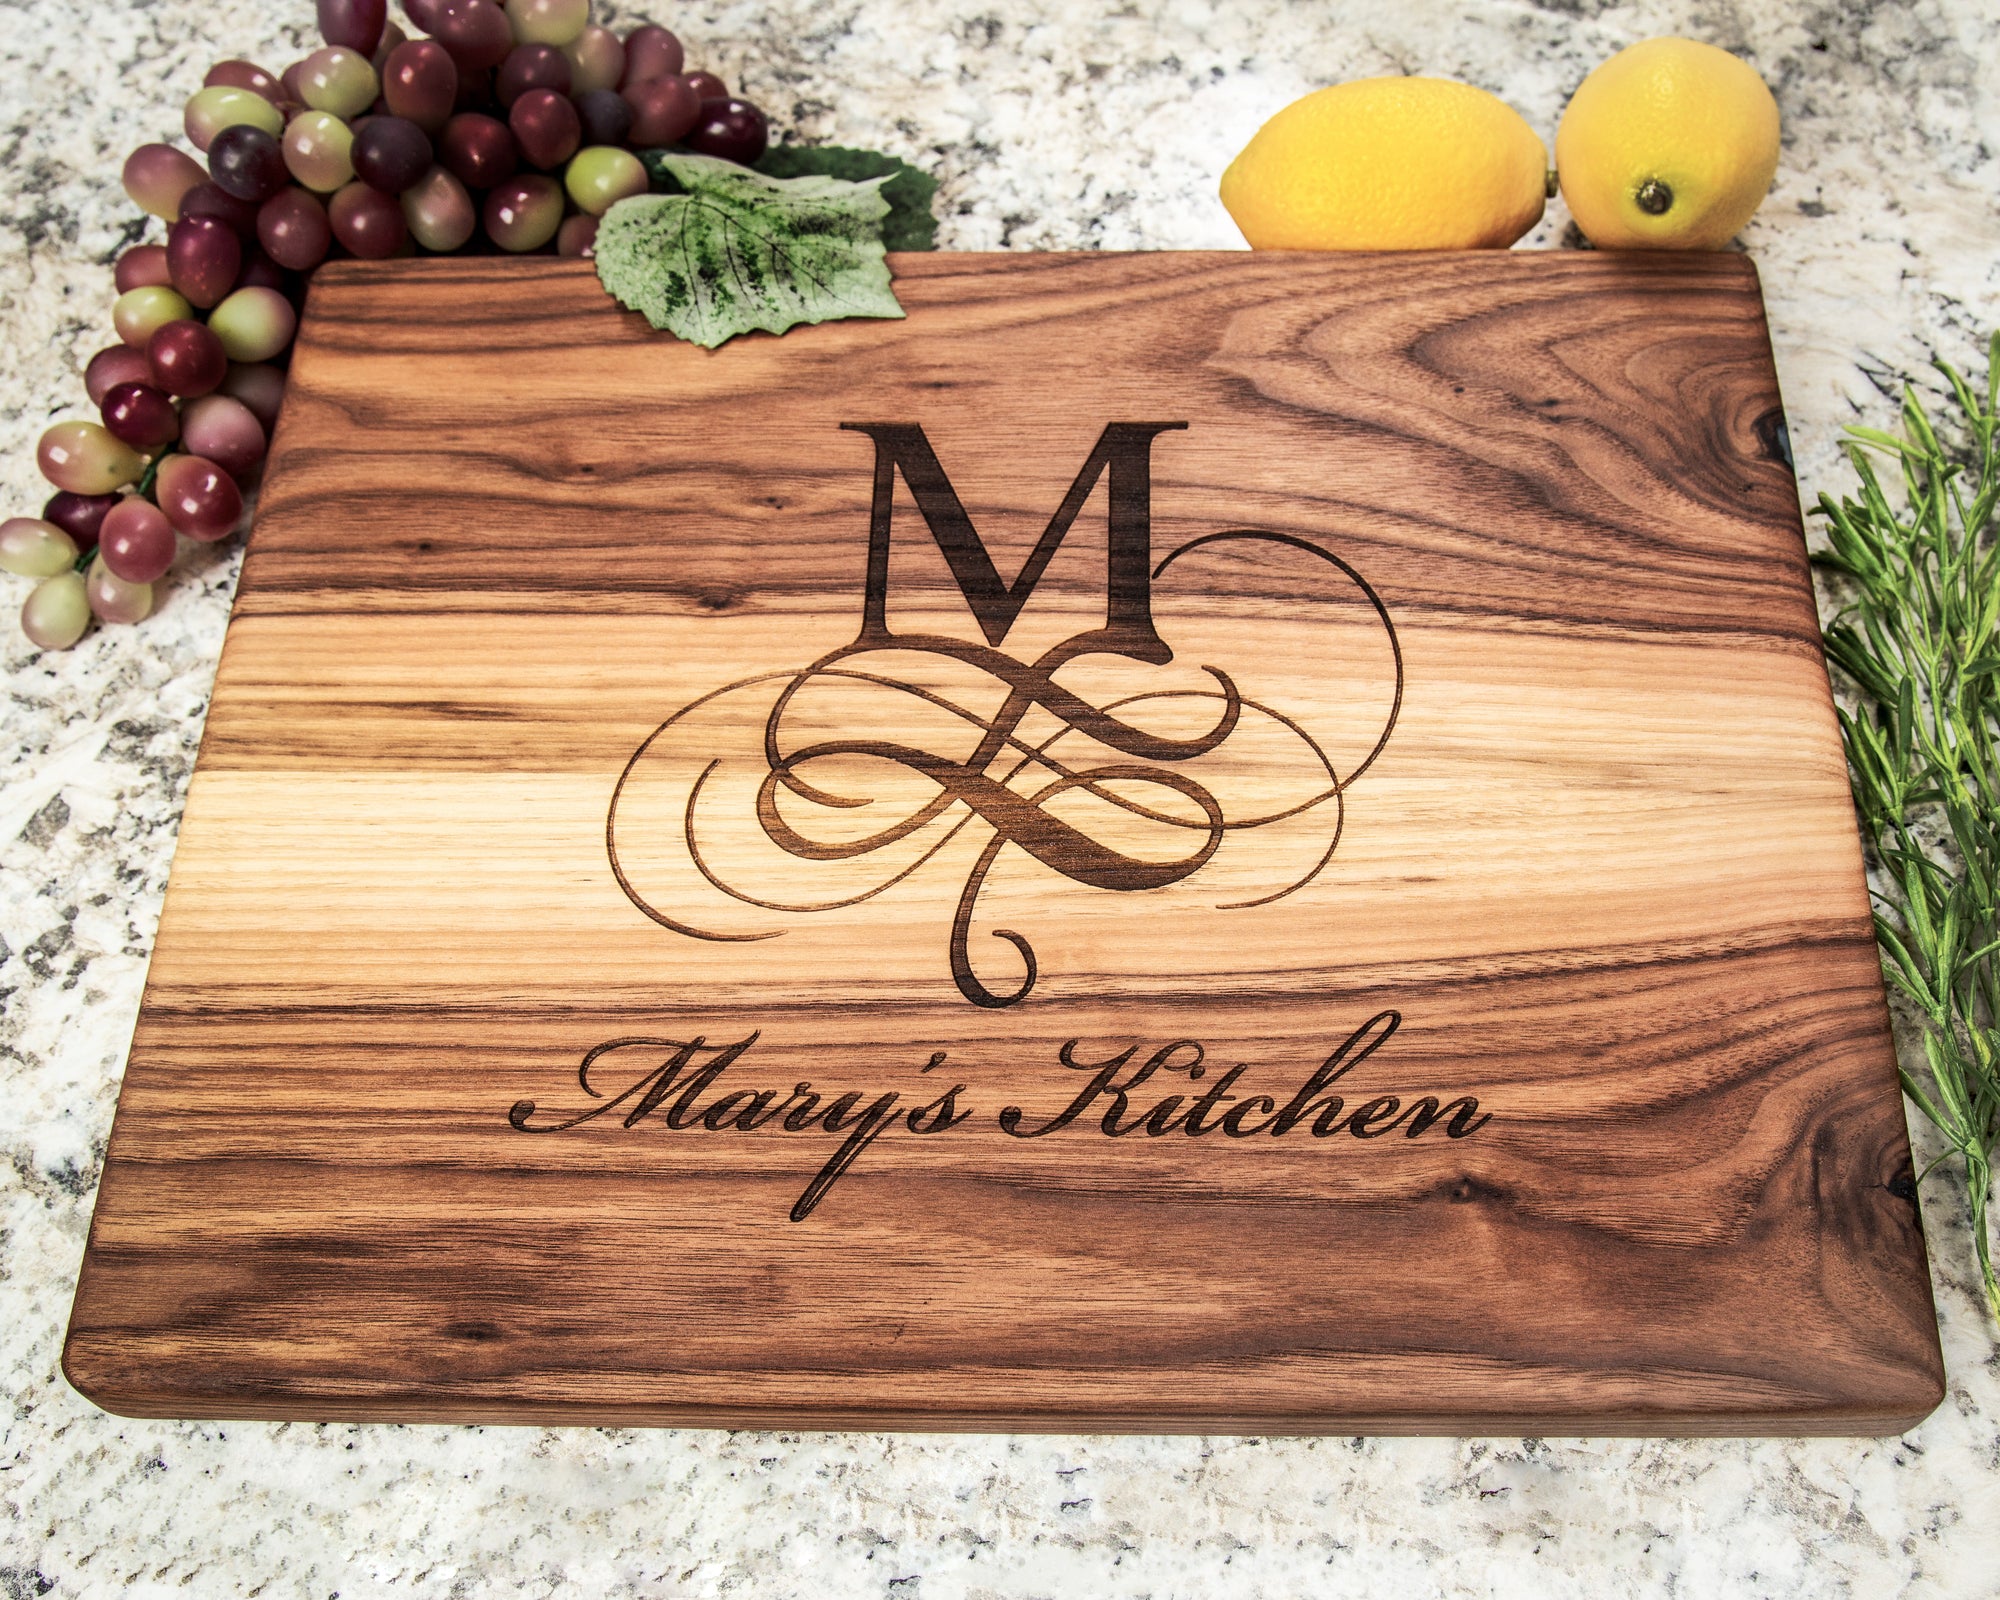 Gift them something special that demonstrates the perfect confluence of emotion and sophistication: our gorgeous Personalized Cutting Board. Whether it's a monogram that will be remembered always, a wedding or anniversary present that signifies your affection